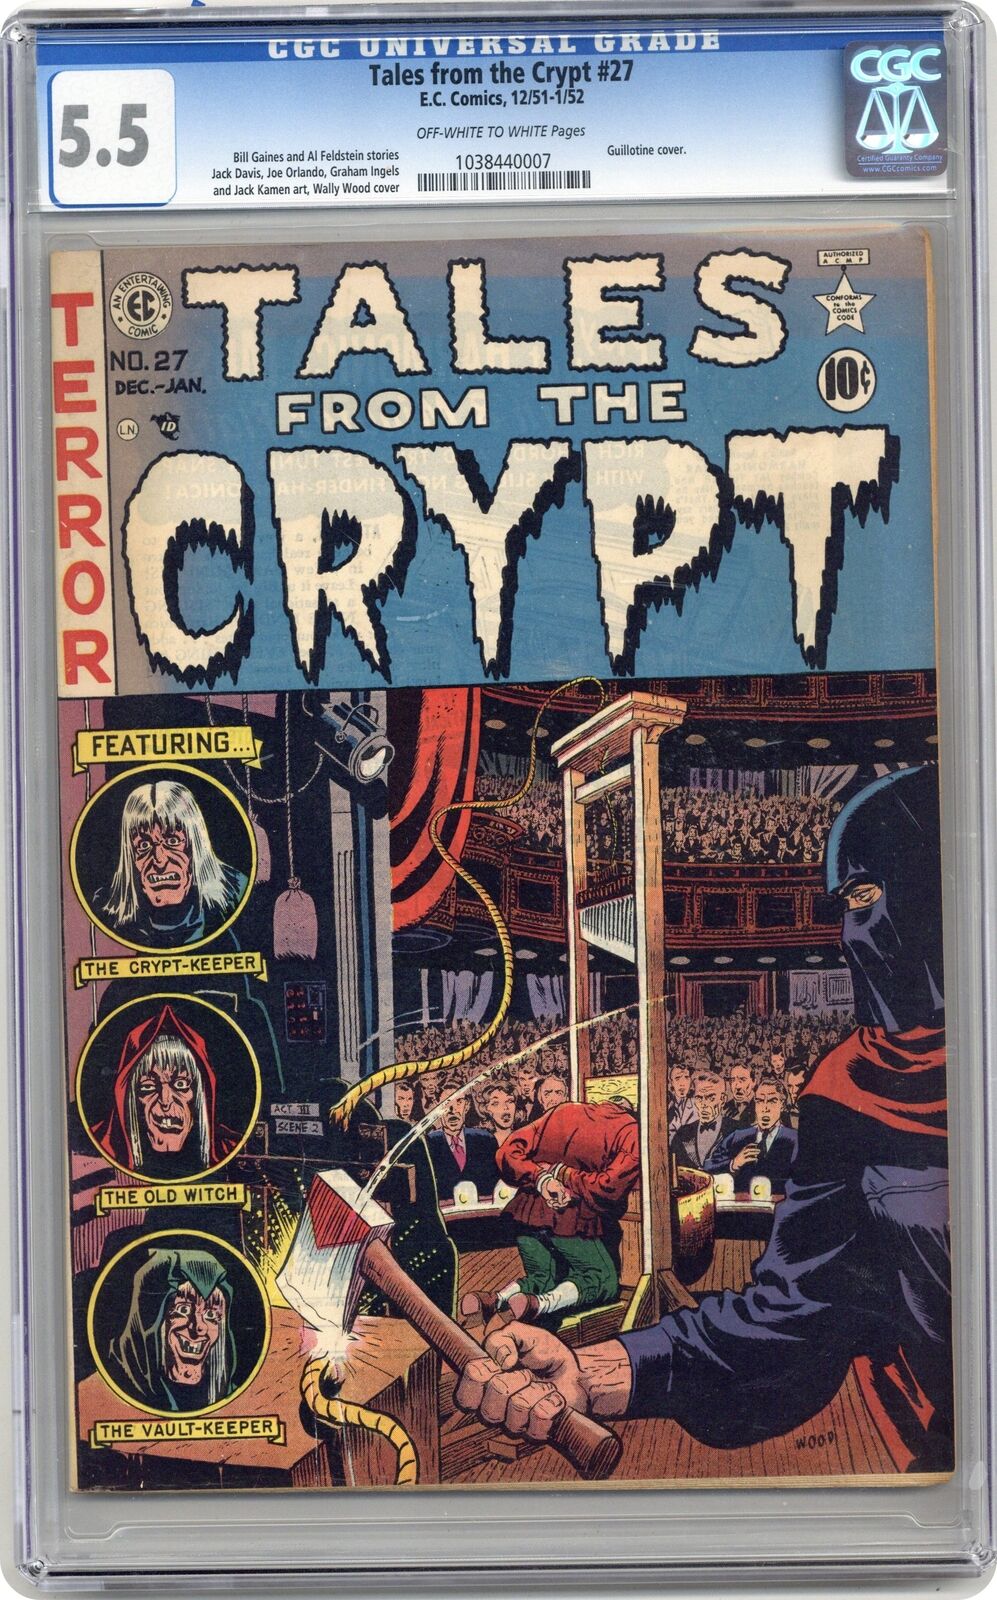 Tales from the Crypt #27 CGC 5.5 1951 1038440007